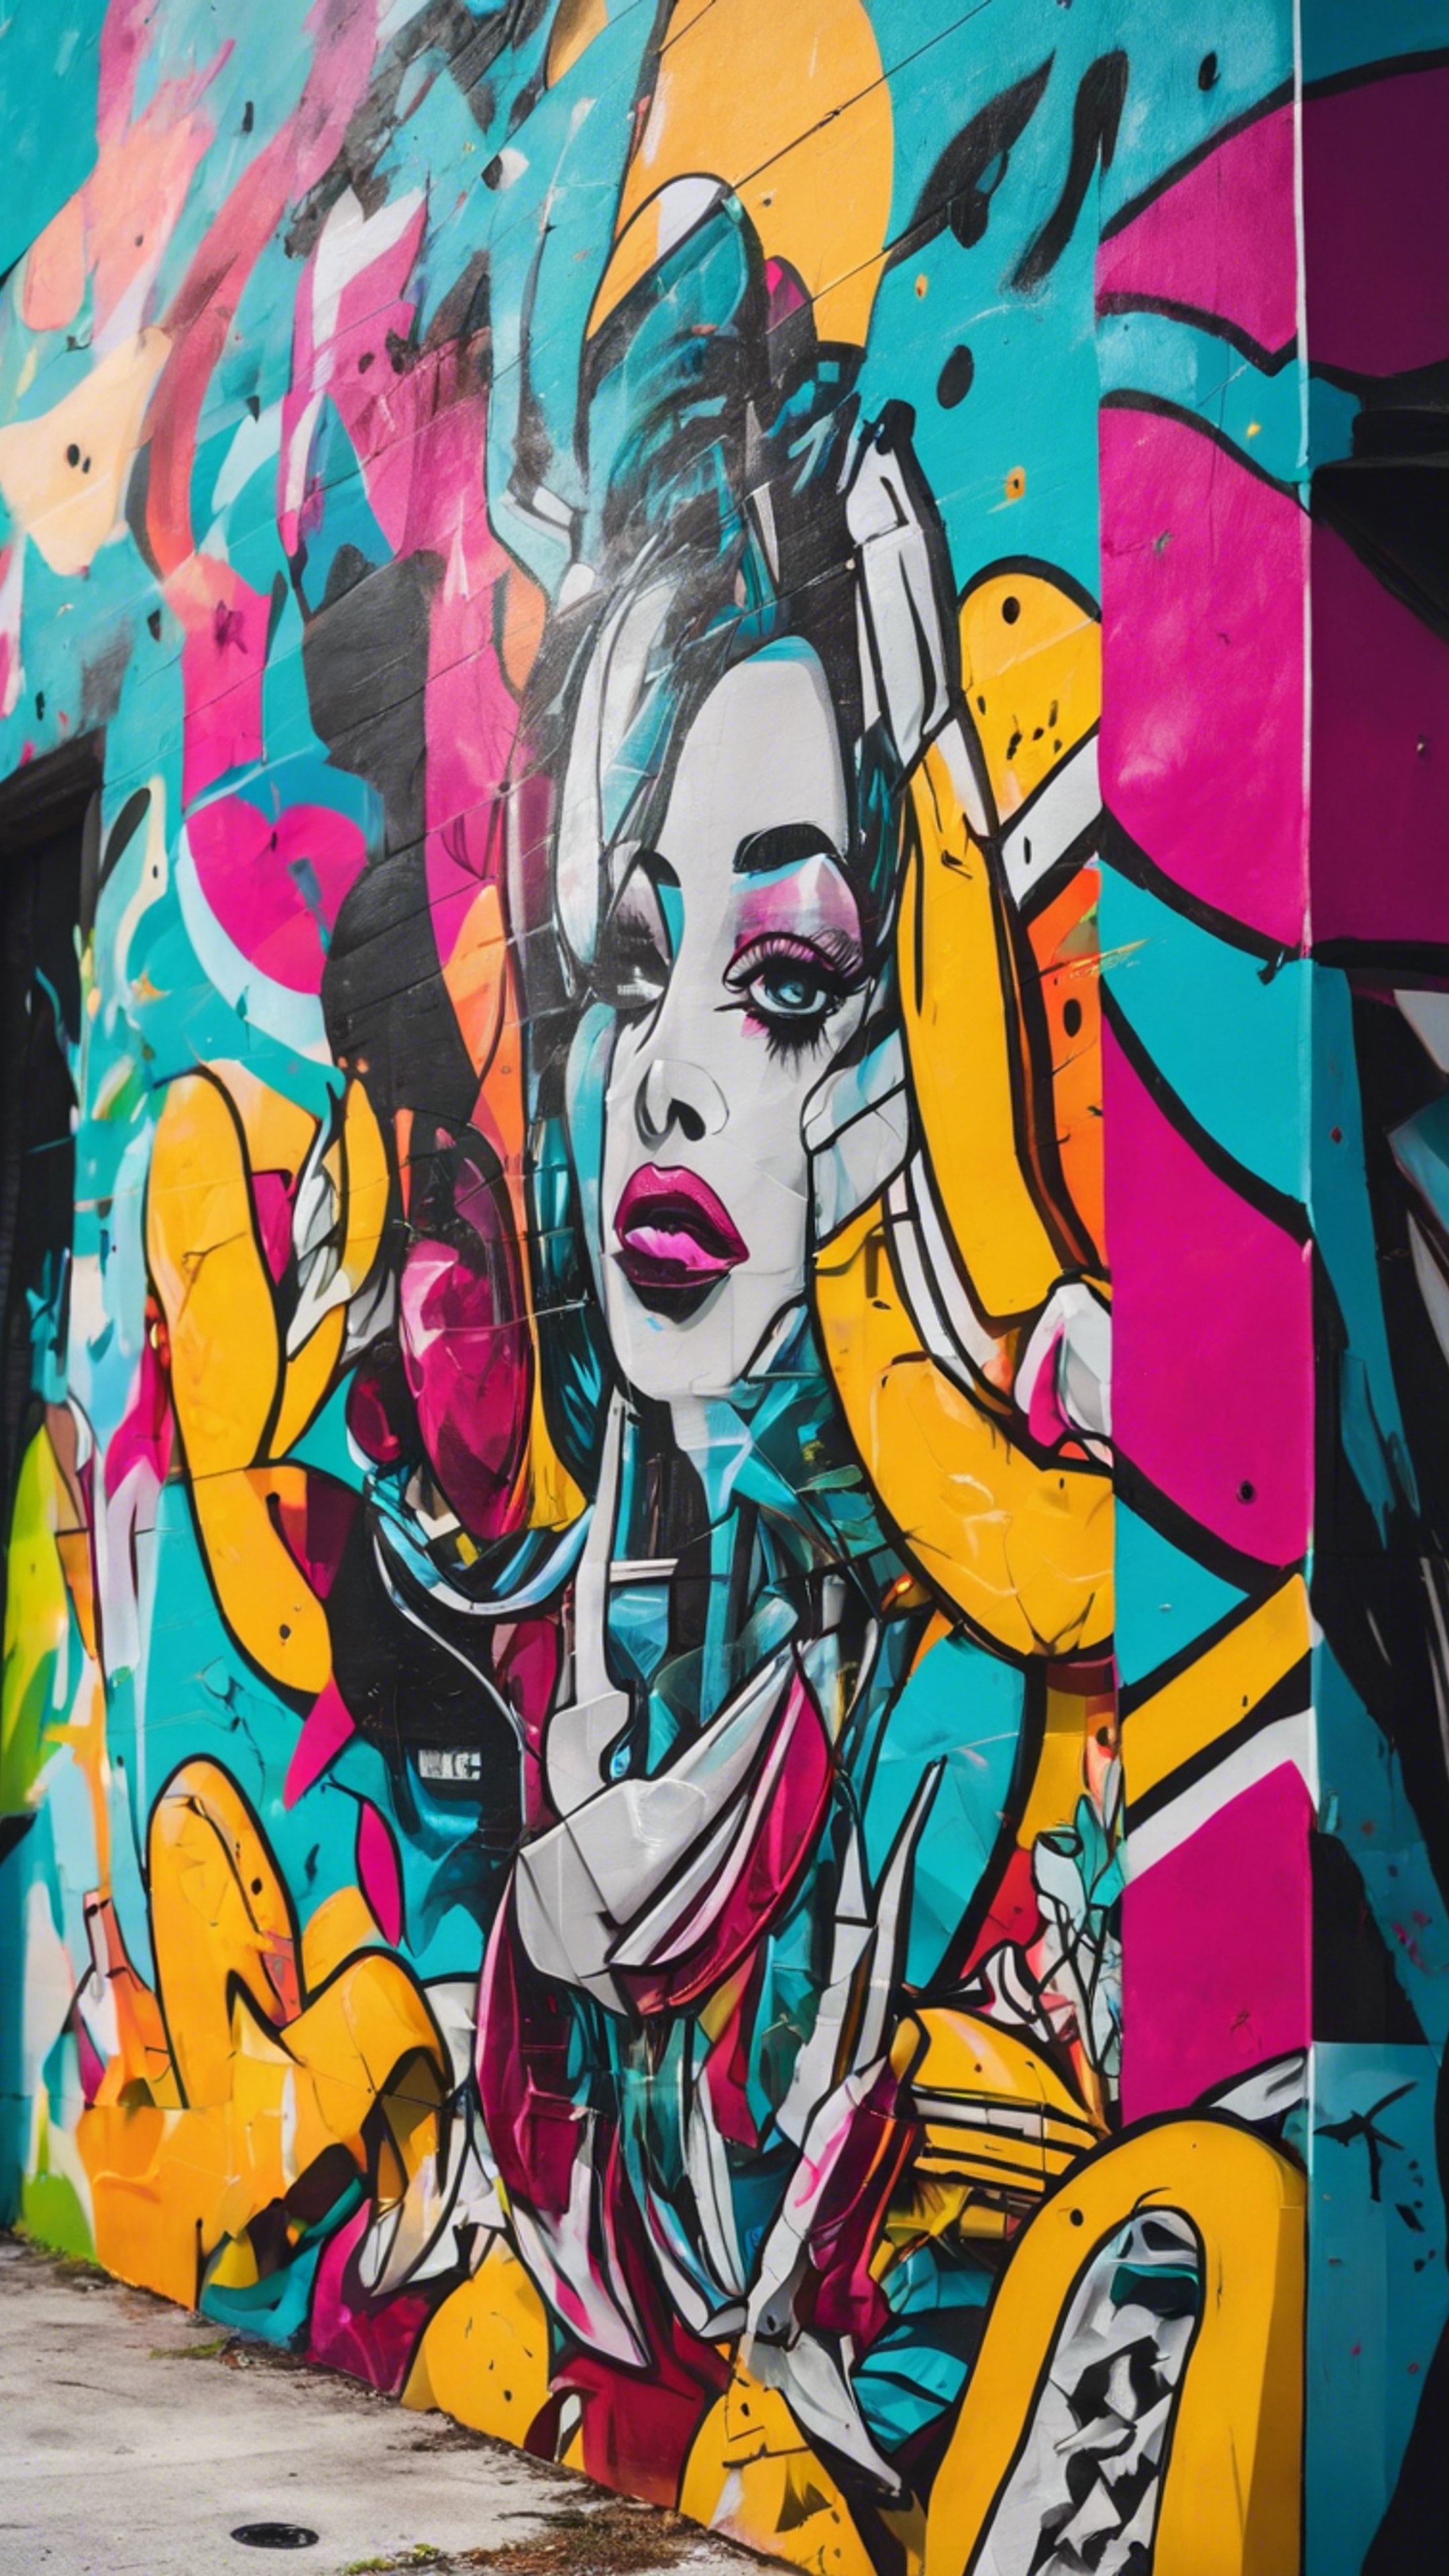 A vibrant street art mural in Wynwood, Miami, featuring abstract art and bright colors. 墙纸[fc74442468964623923a]